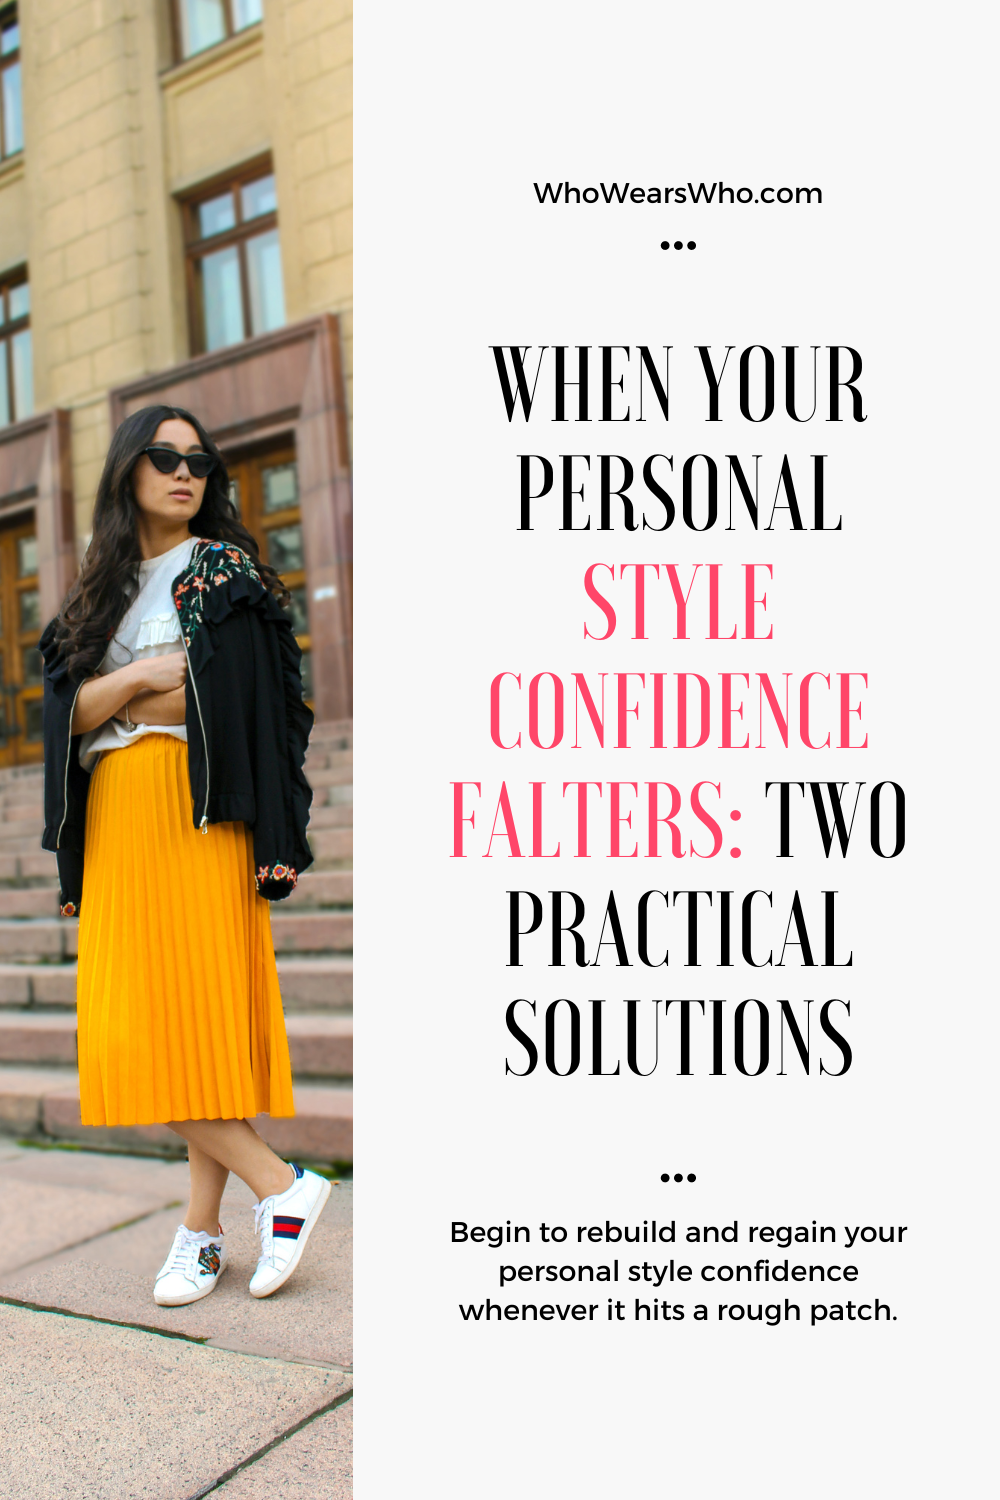 When your personal style confidence falters